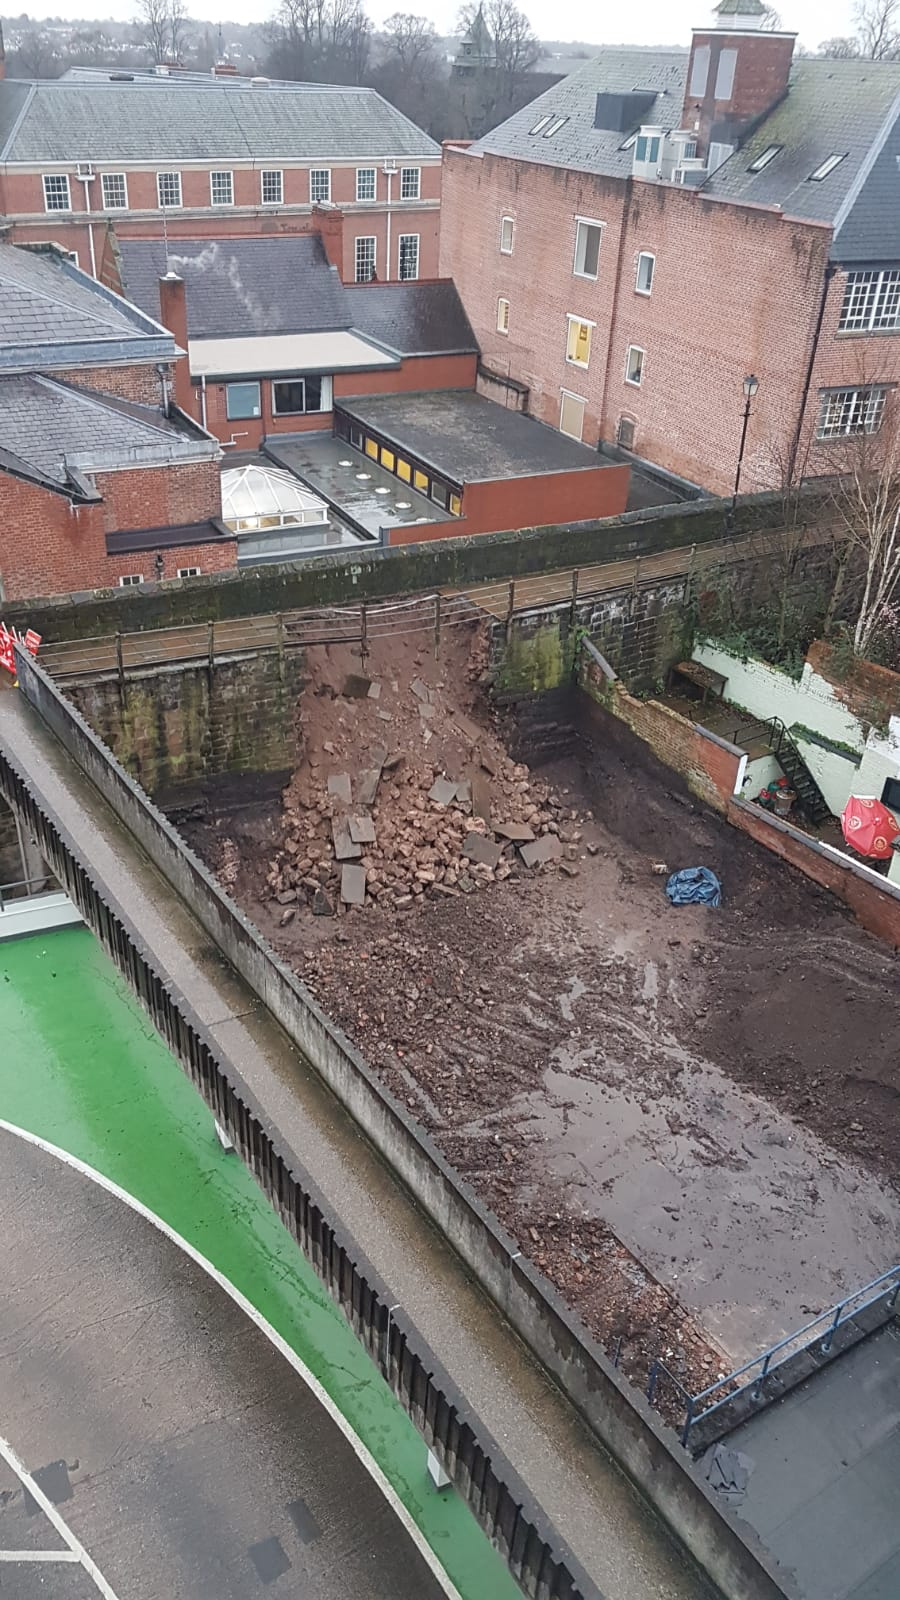 The collapsed section of Chester City Walls. Picture: @LoveLifeLossTom/PA.